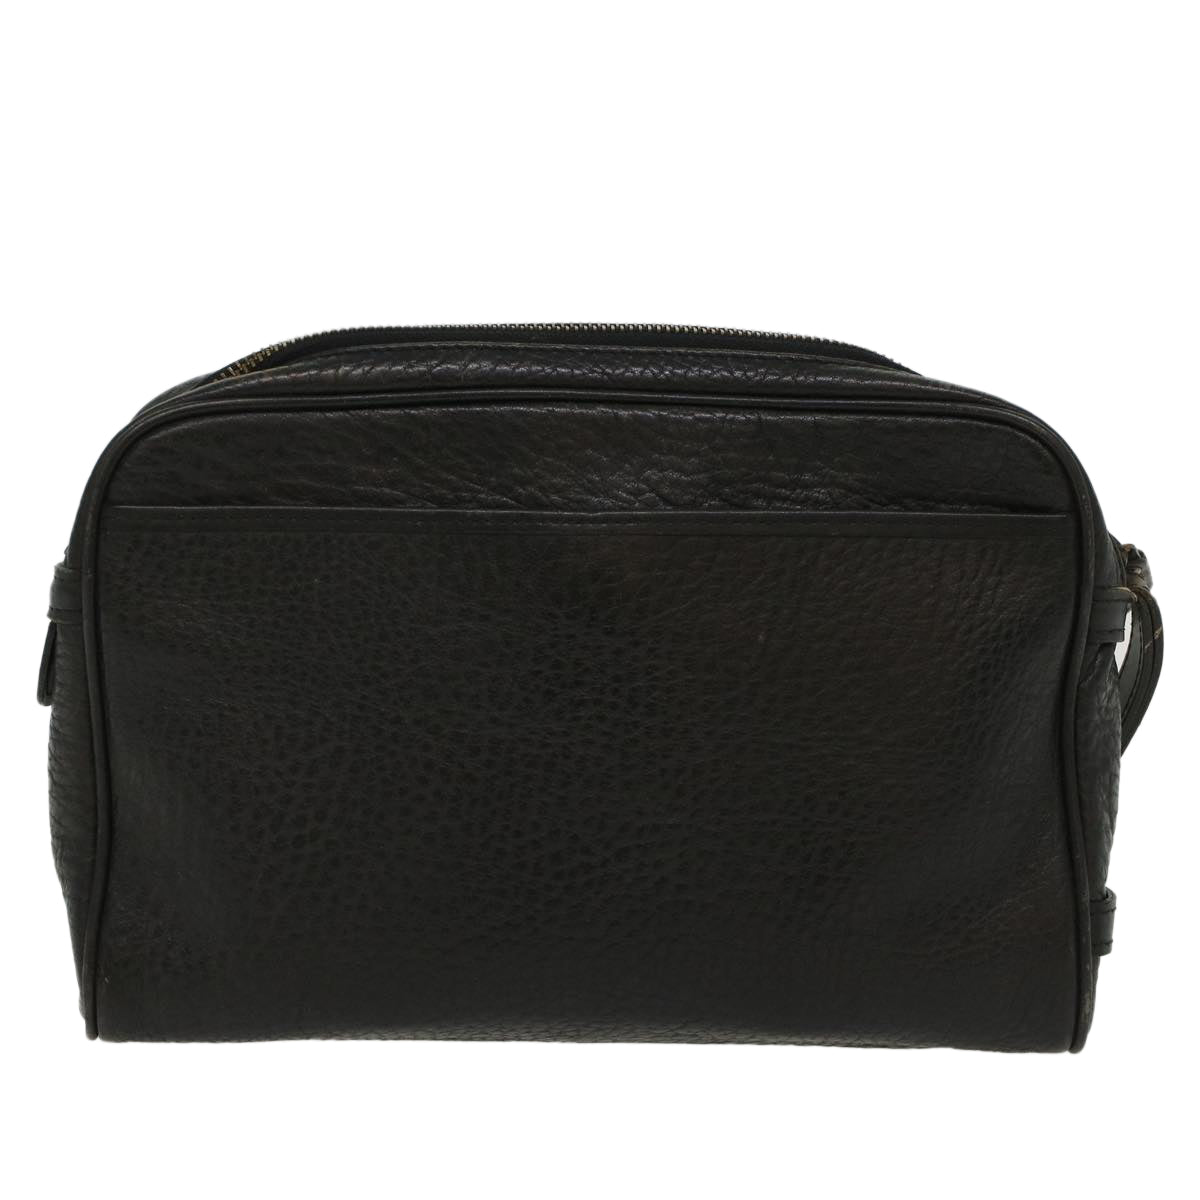 Burberrys Clutch Bag Leather Black Auth bs6215